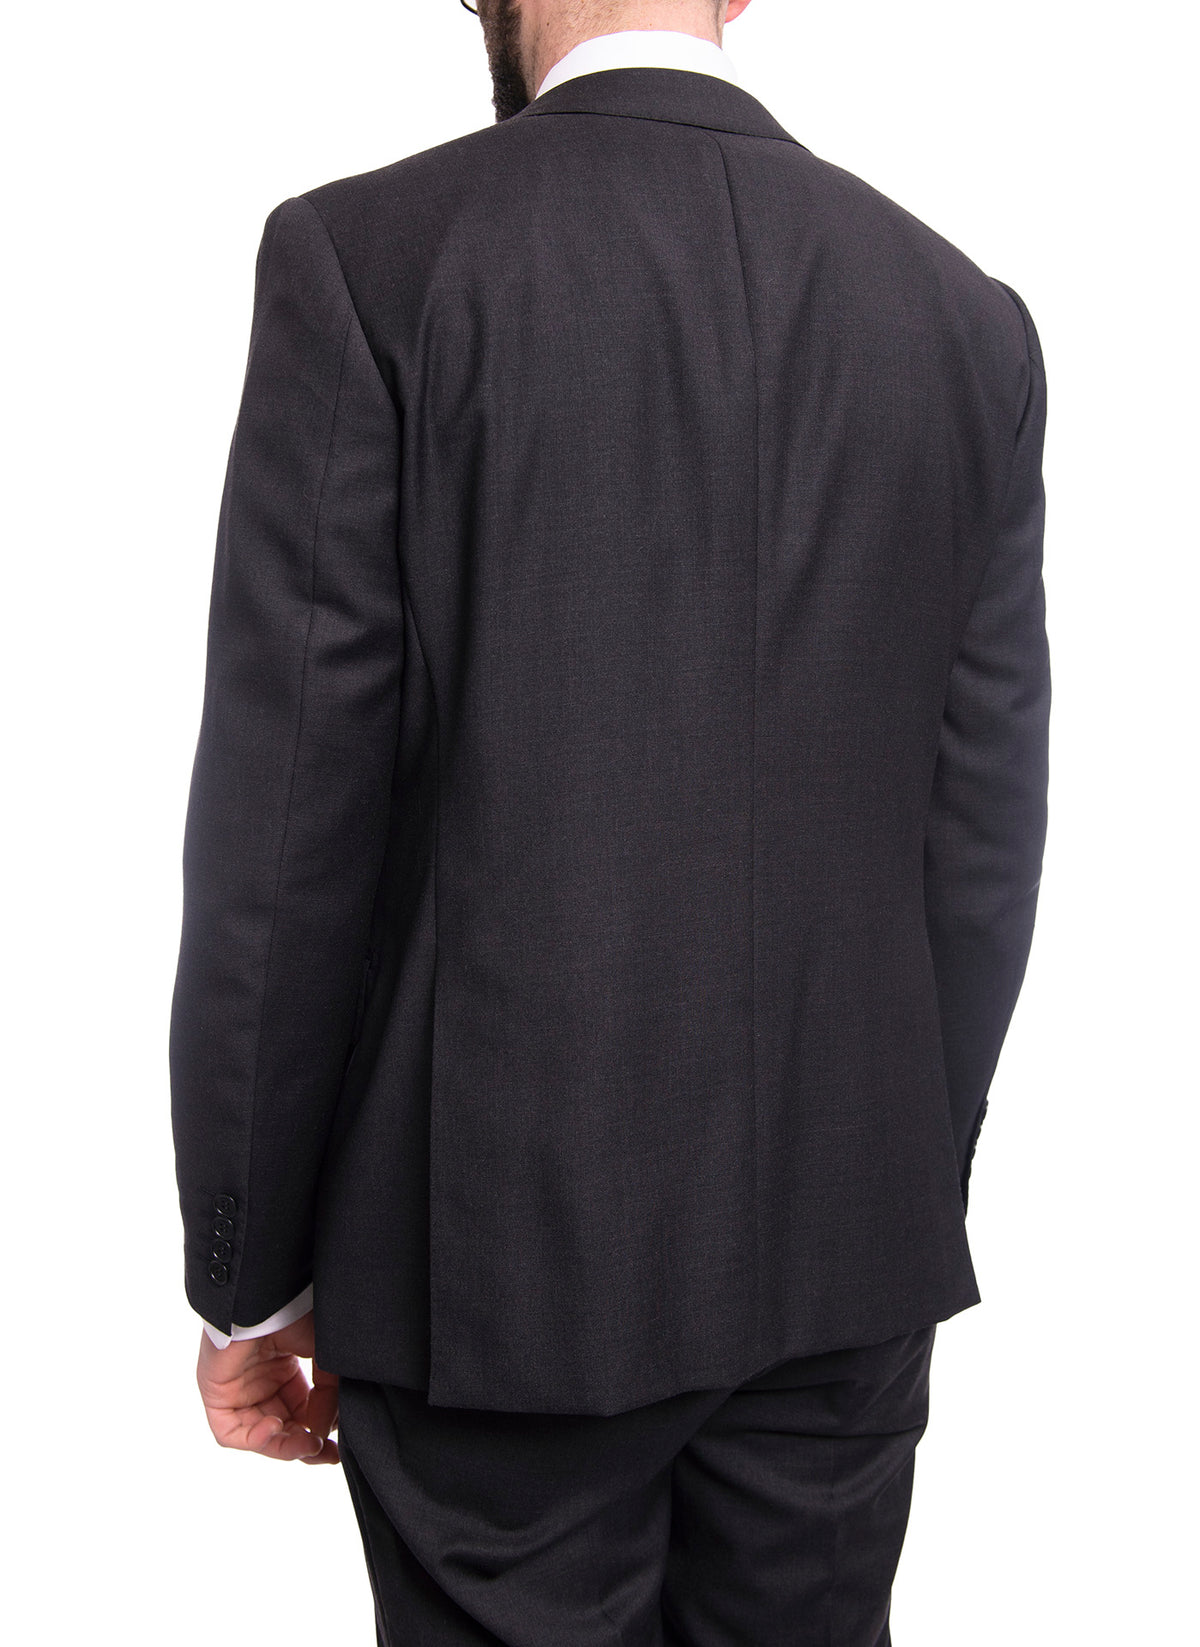 Blujacket Mens Solid Charcoal Gray Wool Cashmere Blend Regular Fit 2 Piece Suit